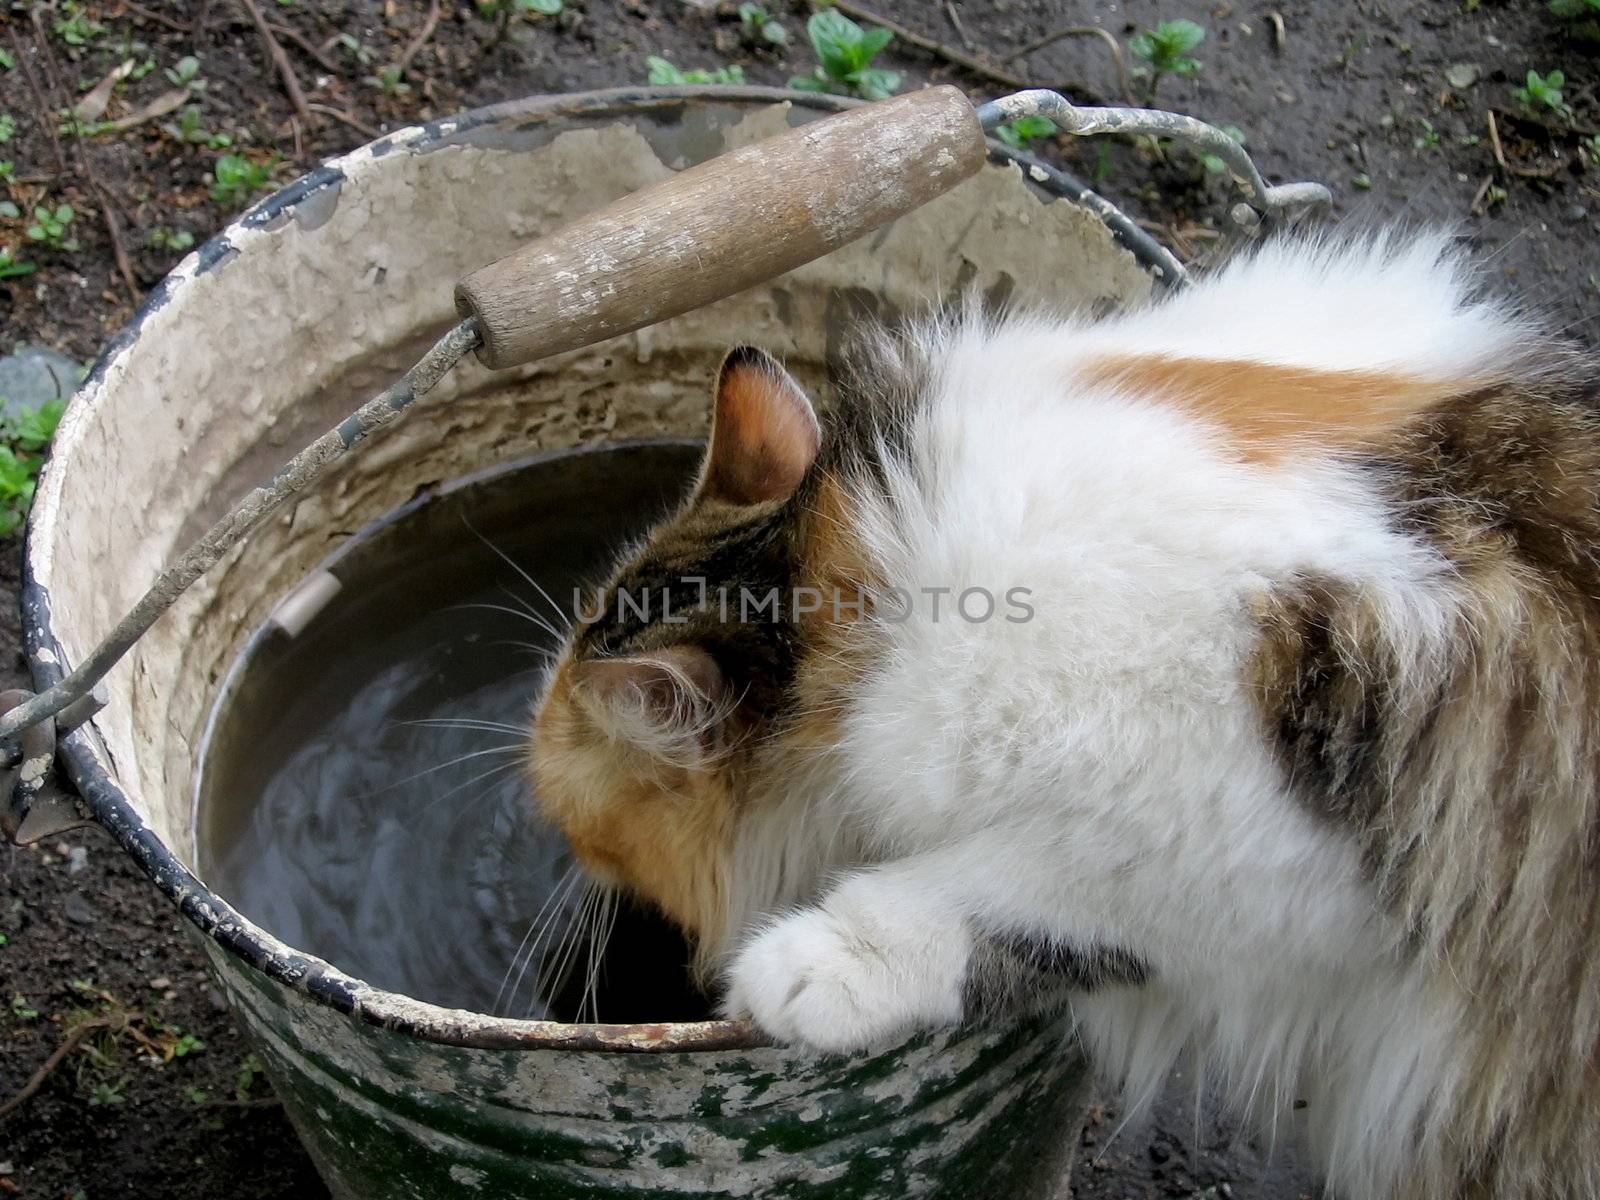 Cute cat drinks water from the bucket